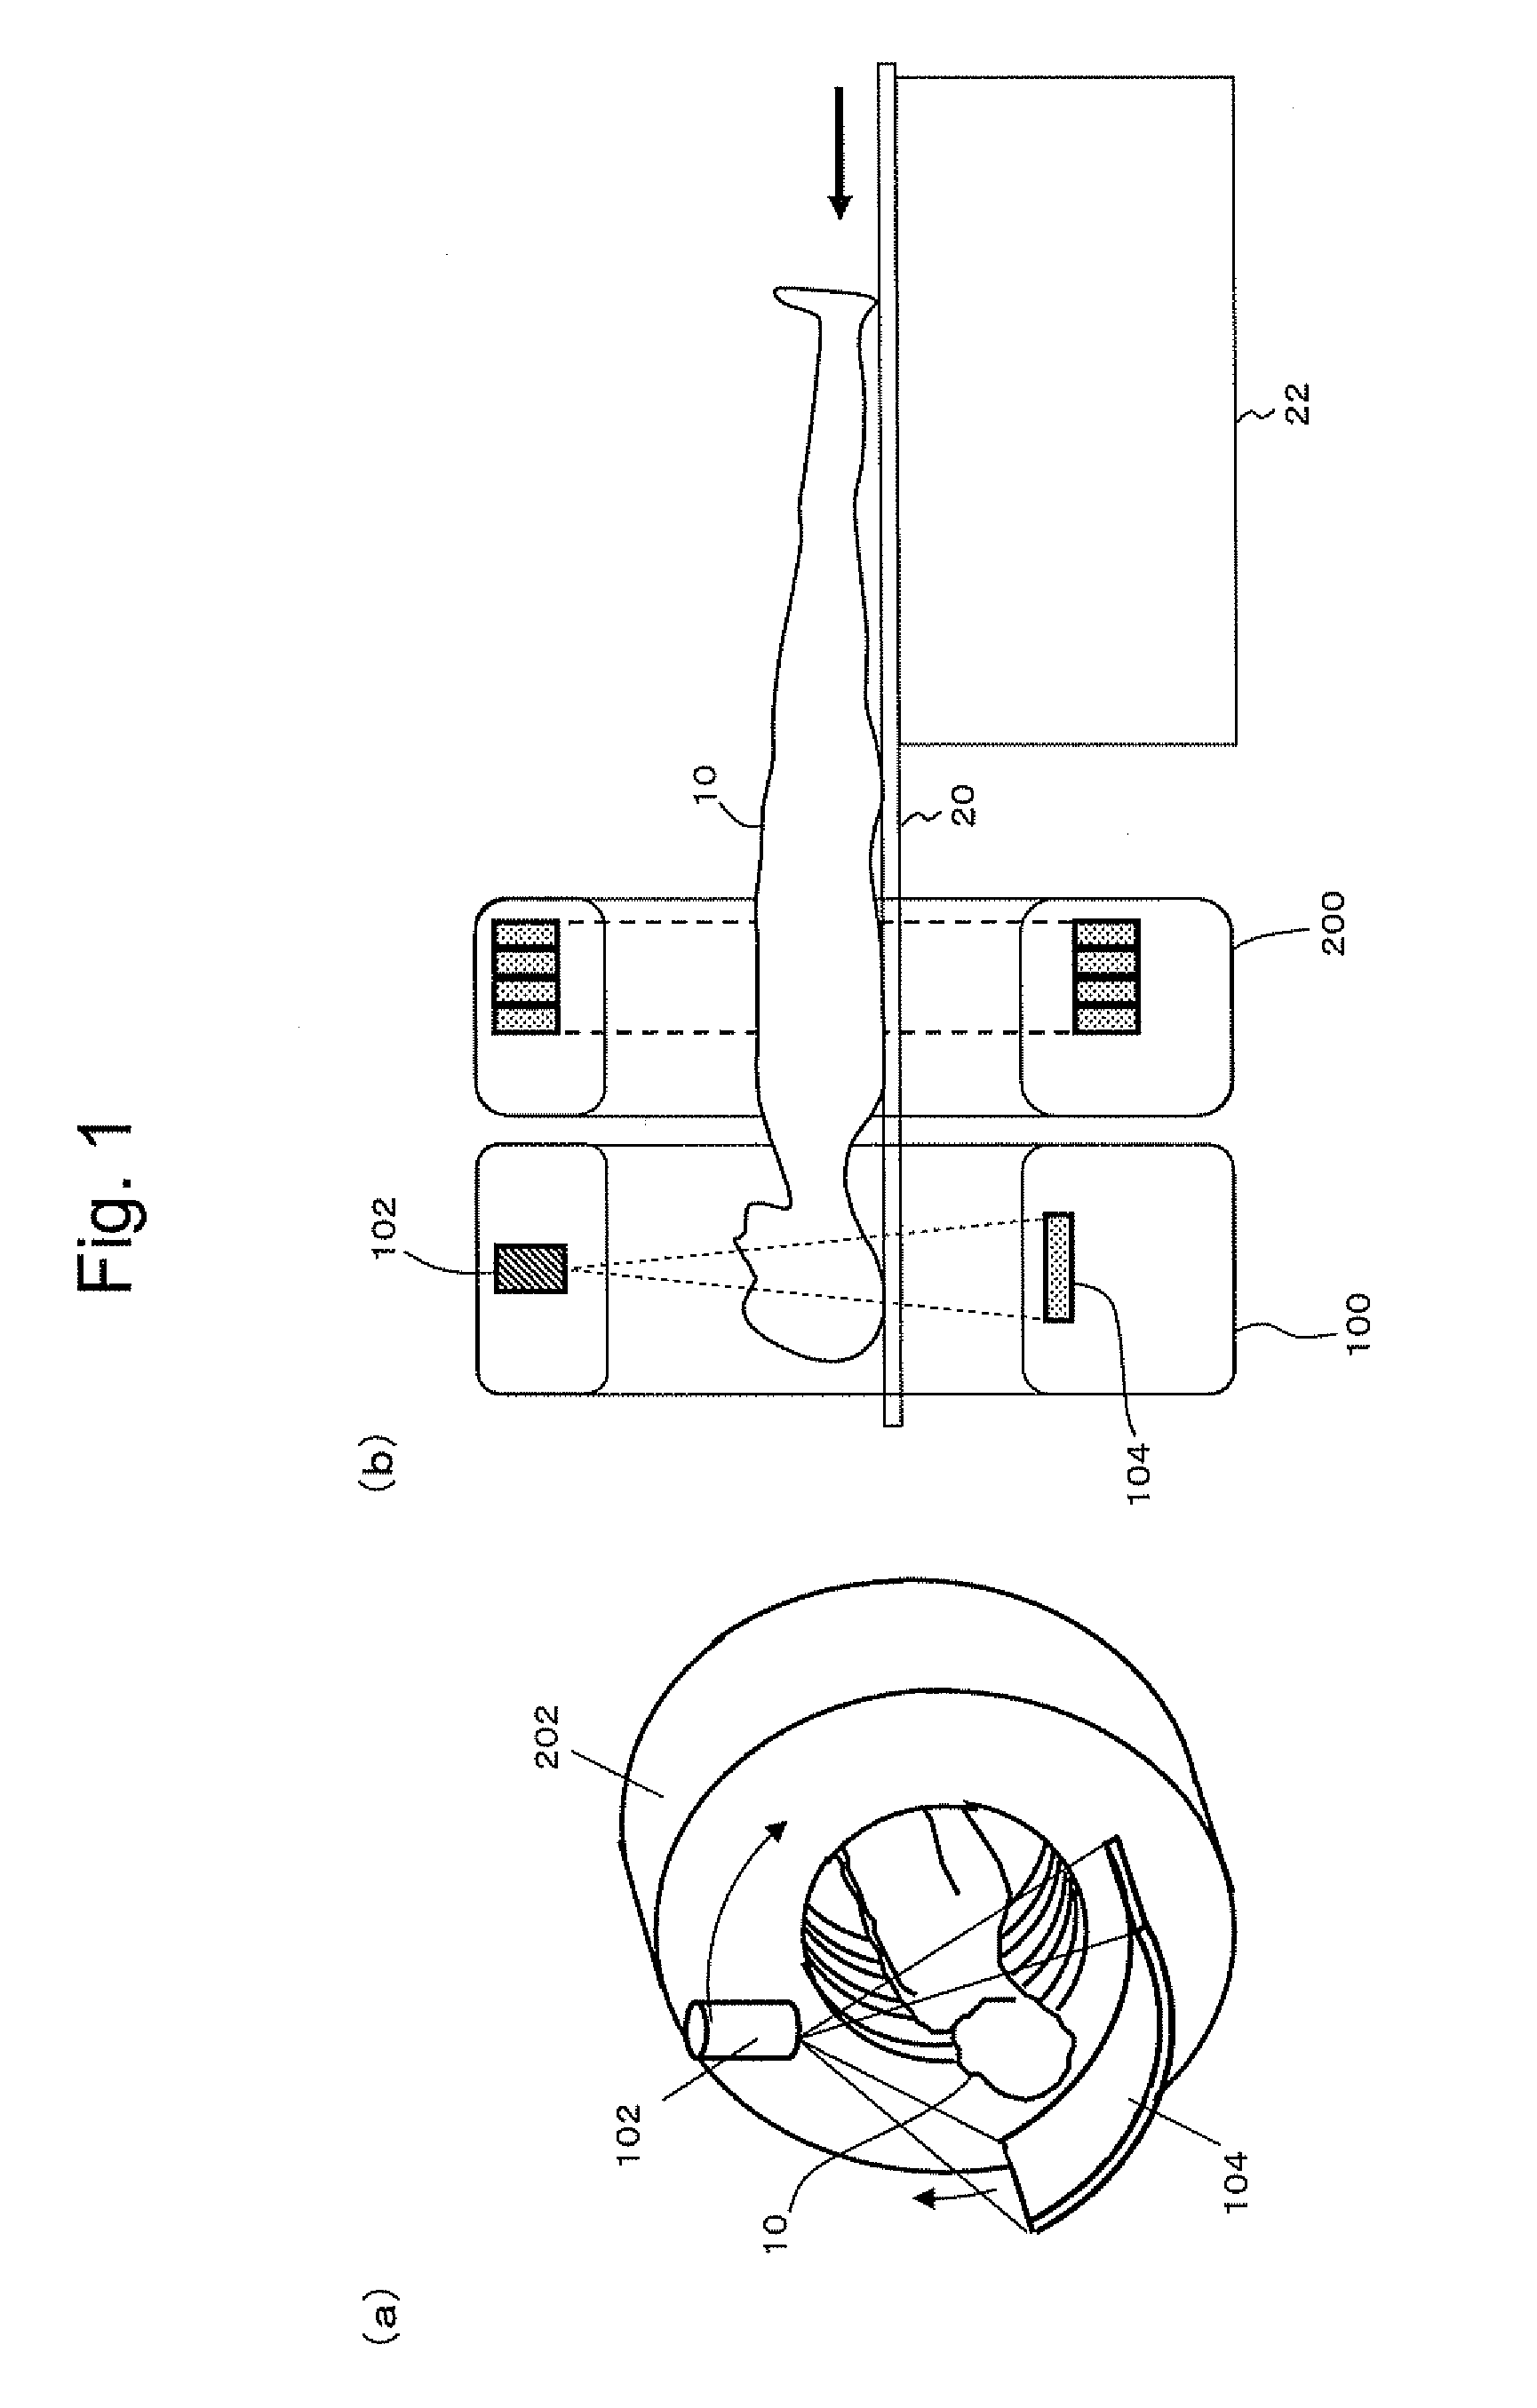 Pet/mri device, pet device, and image reconstruction system